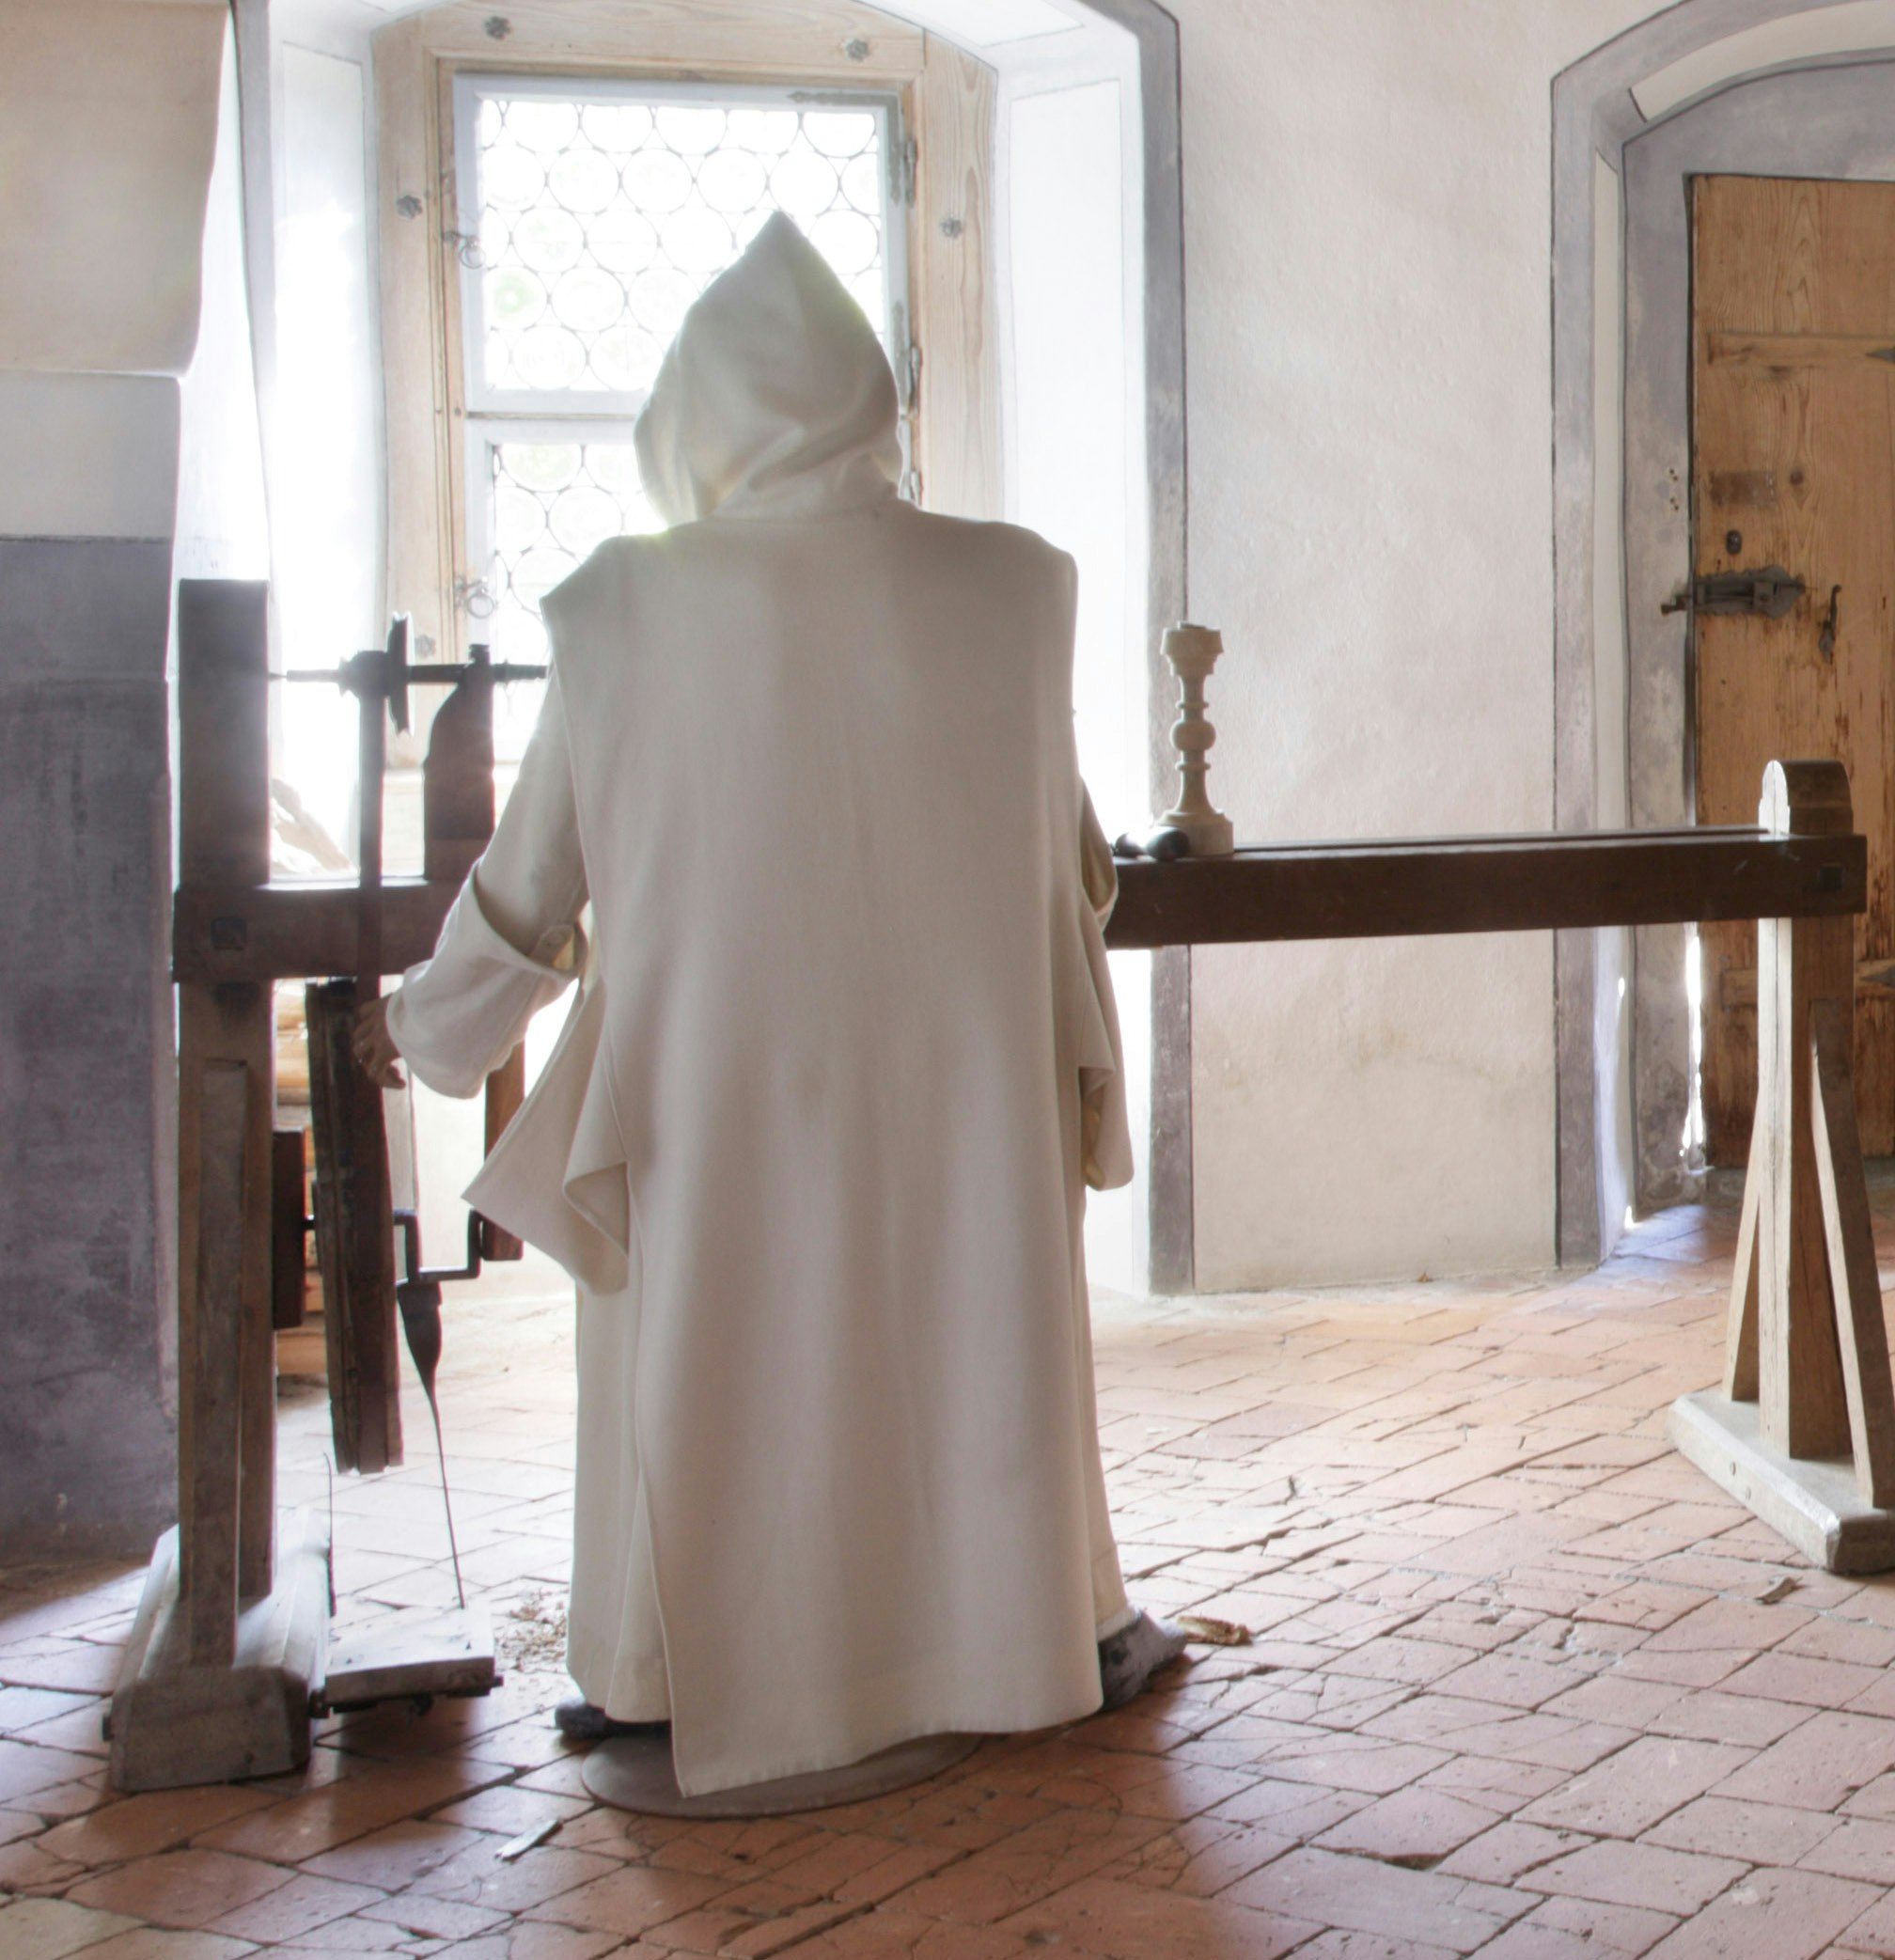 Following the traces of the Carthusian monks